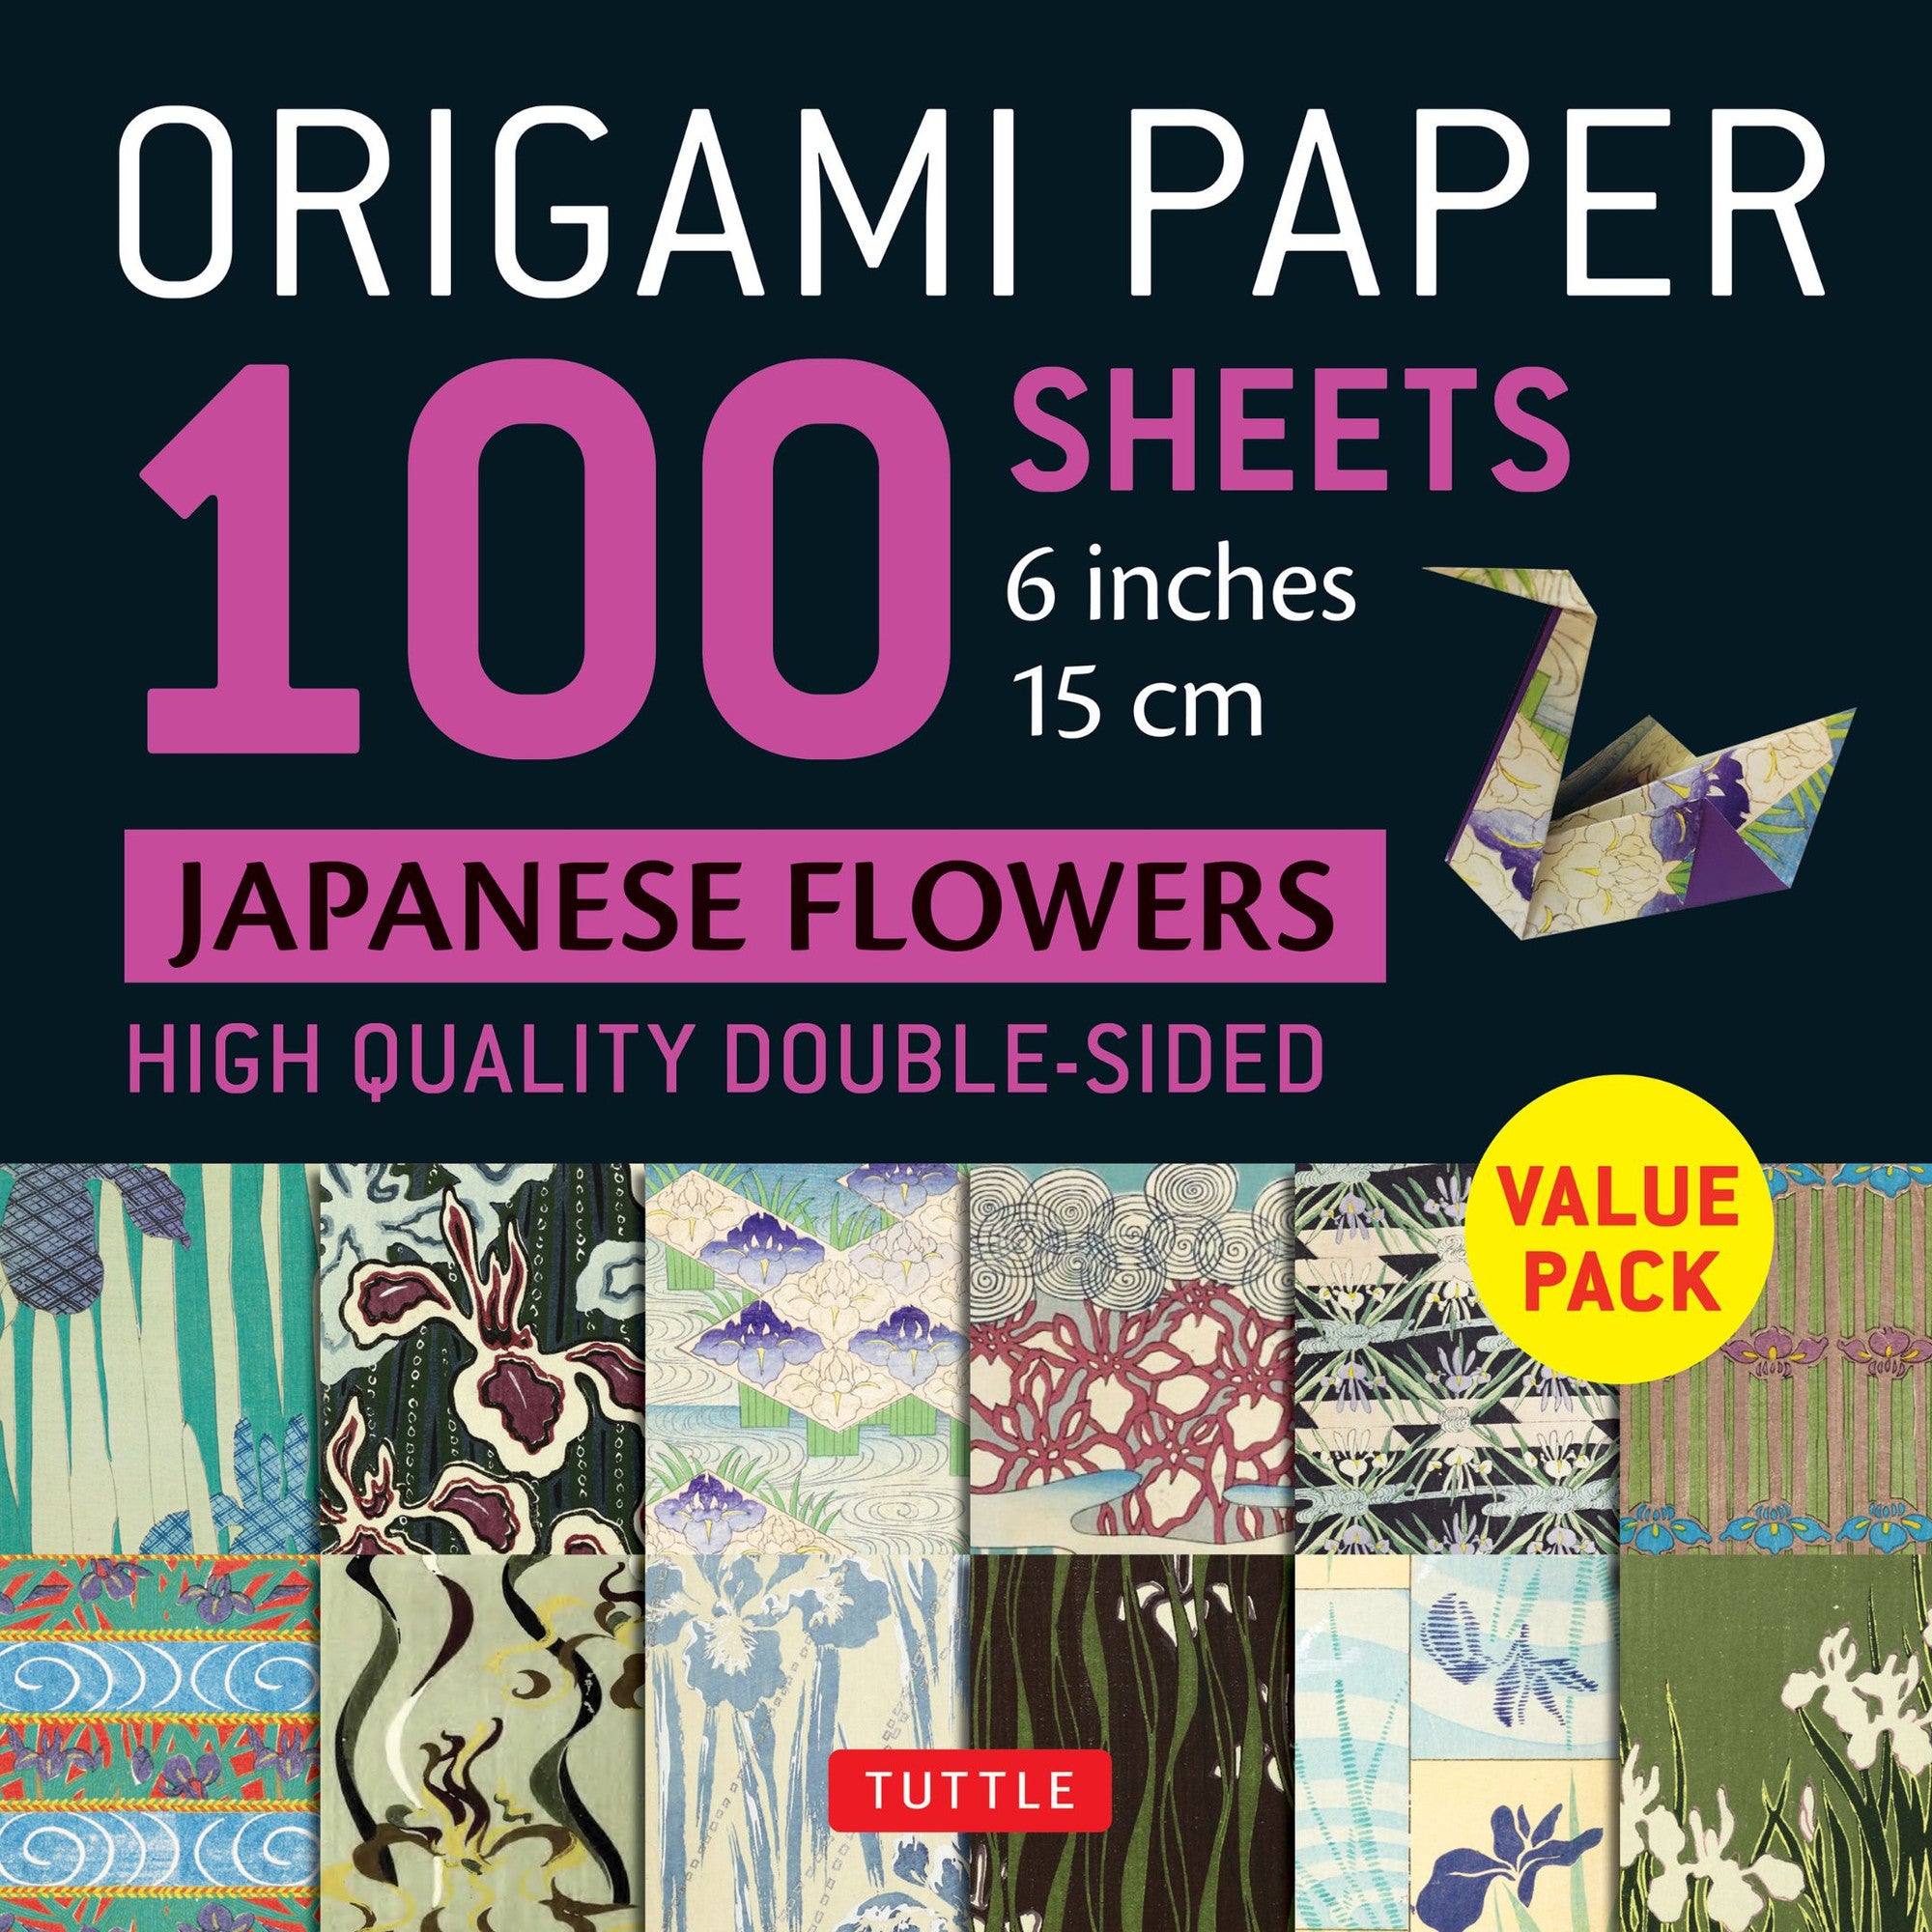 100 Sheets Japanese Flowers Origami Paper